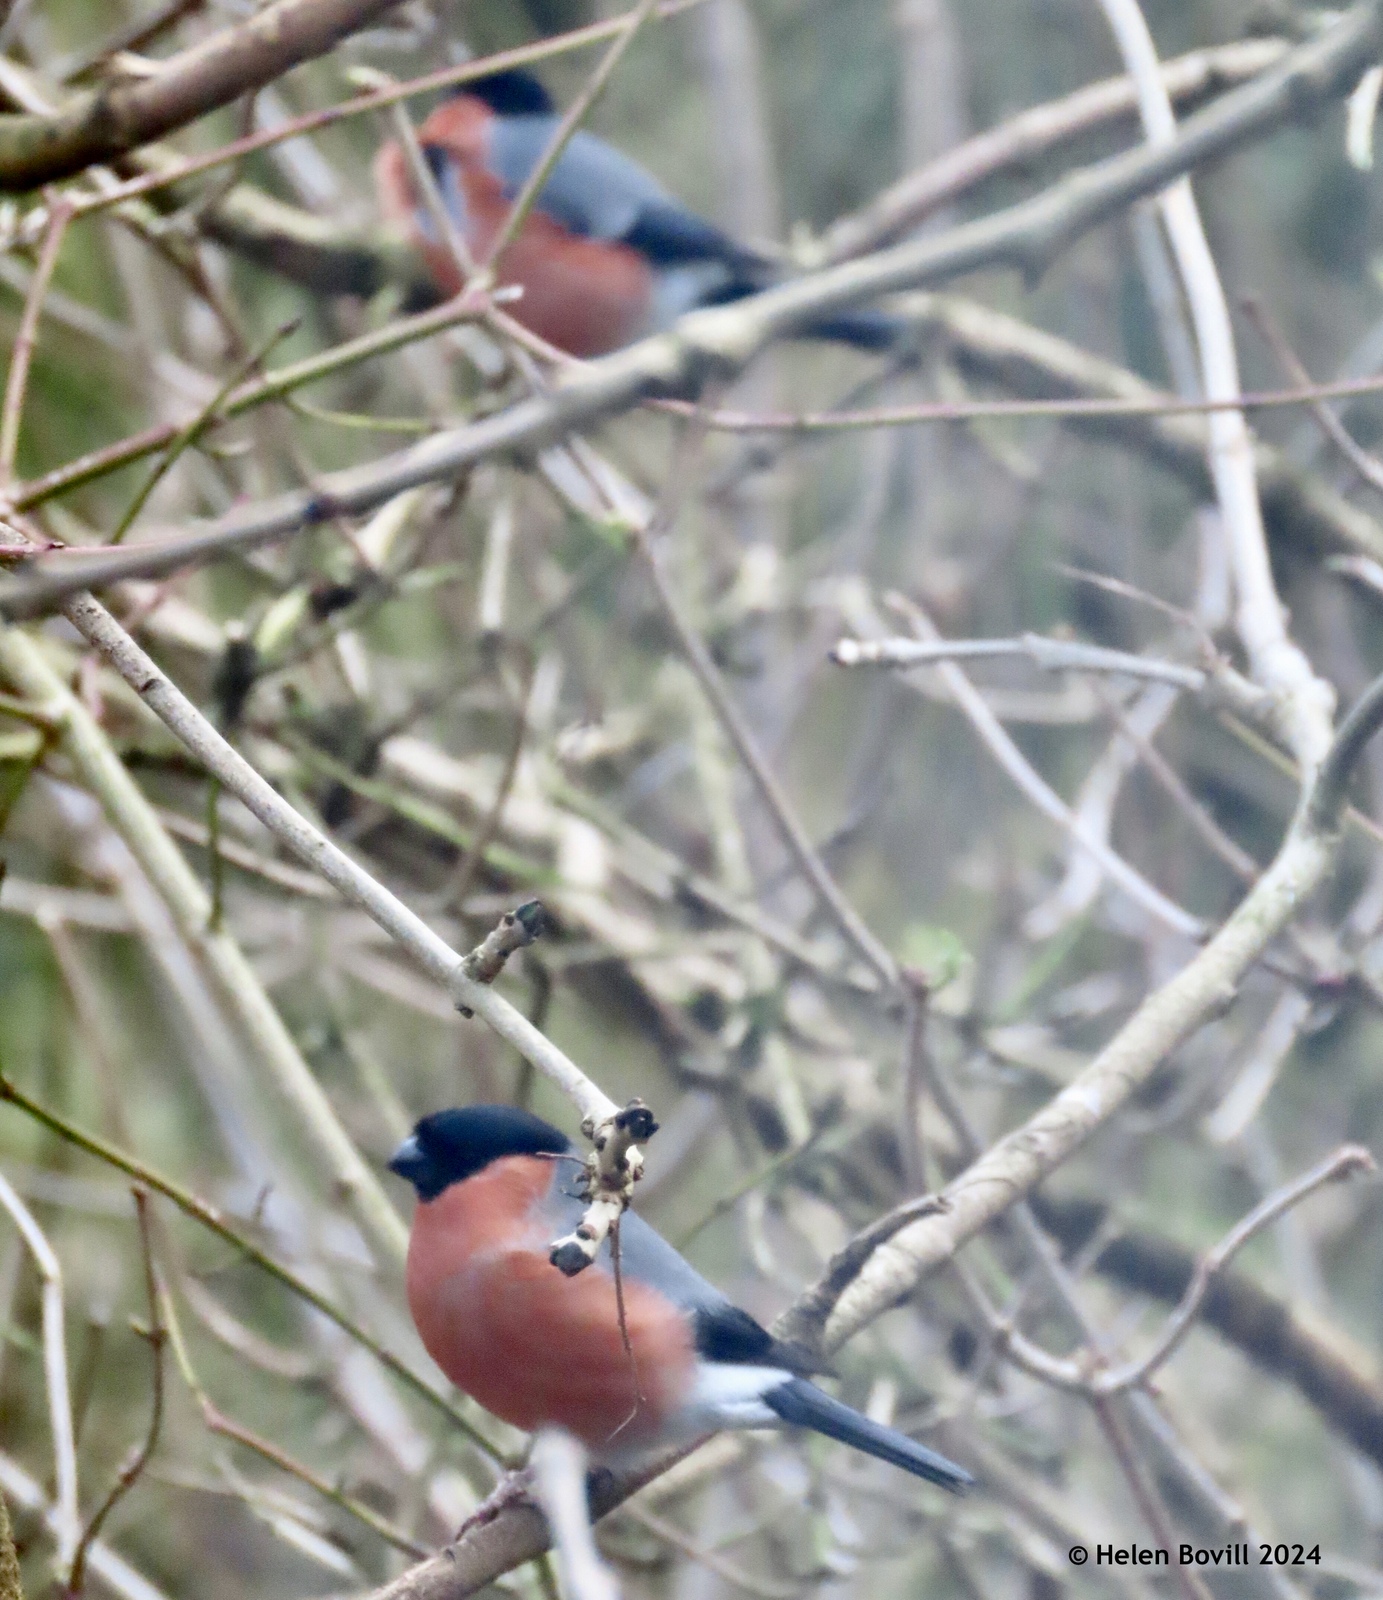 Two male bullfinches high up in the trees in the cemetery